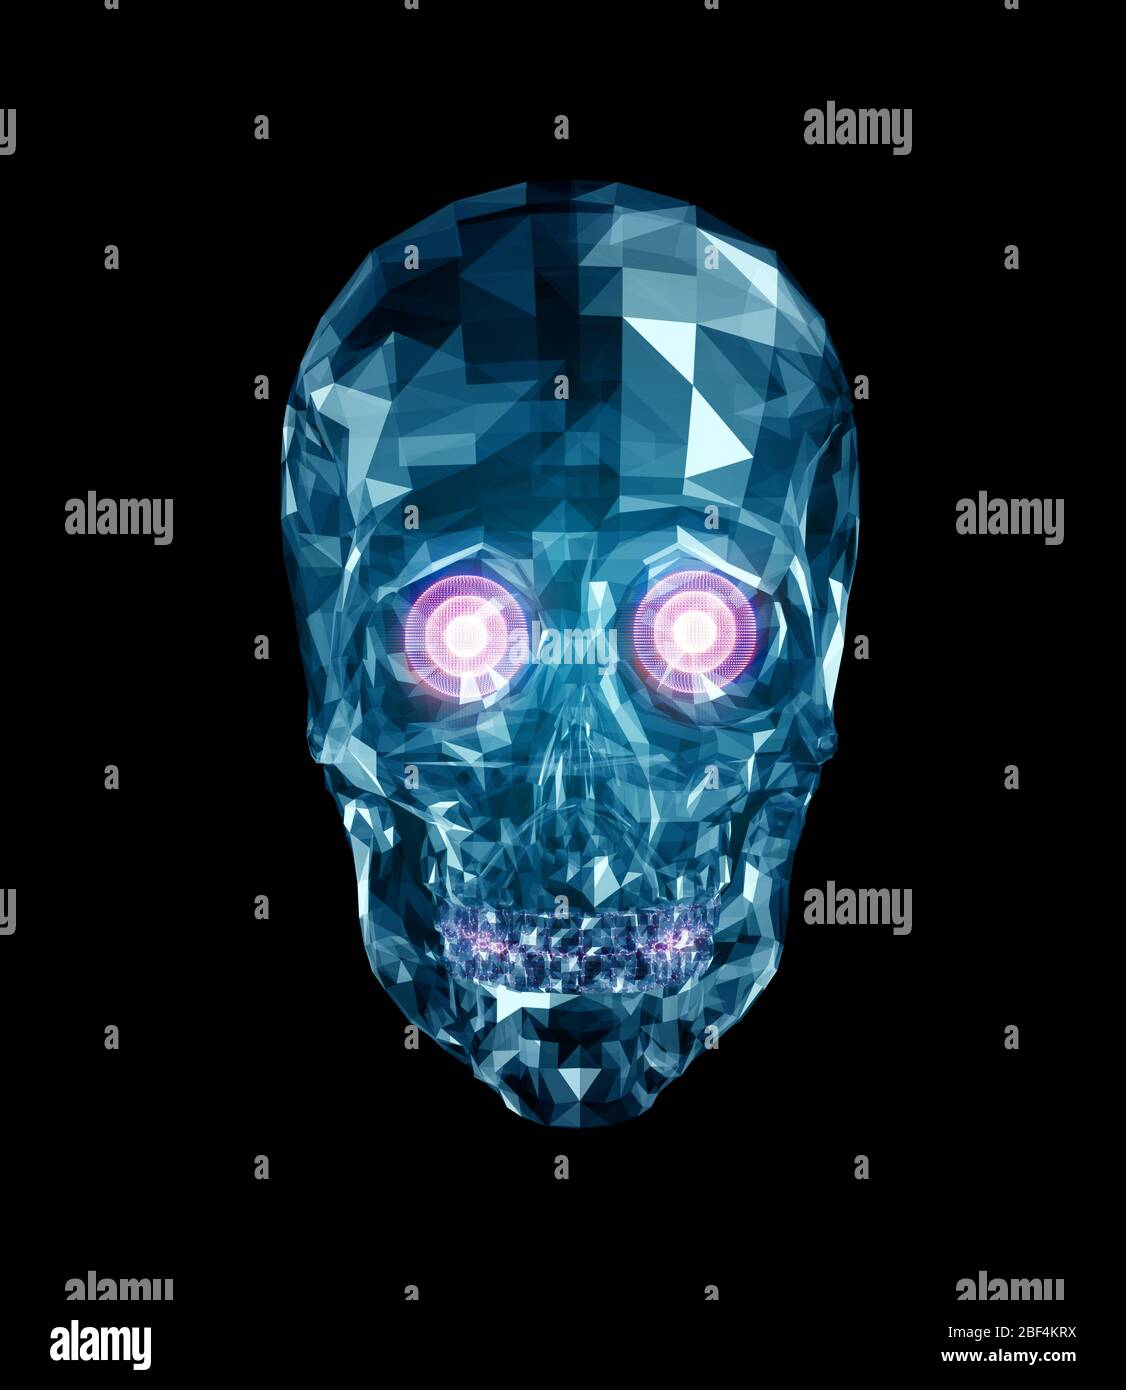 Glowing Crystal Skull With Glowing Eyes Isolated On Black Background. Artificial Intelligence And Big Data Concept Stock Photo